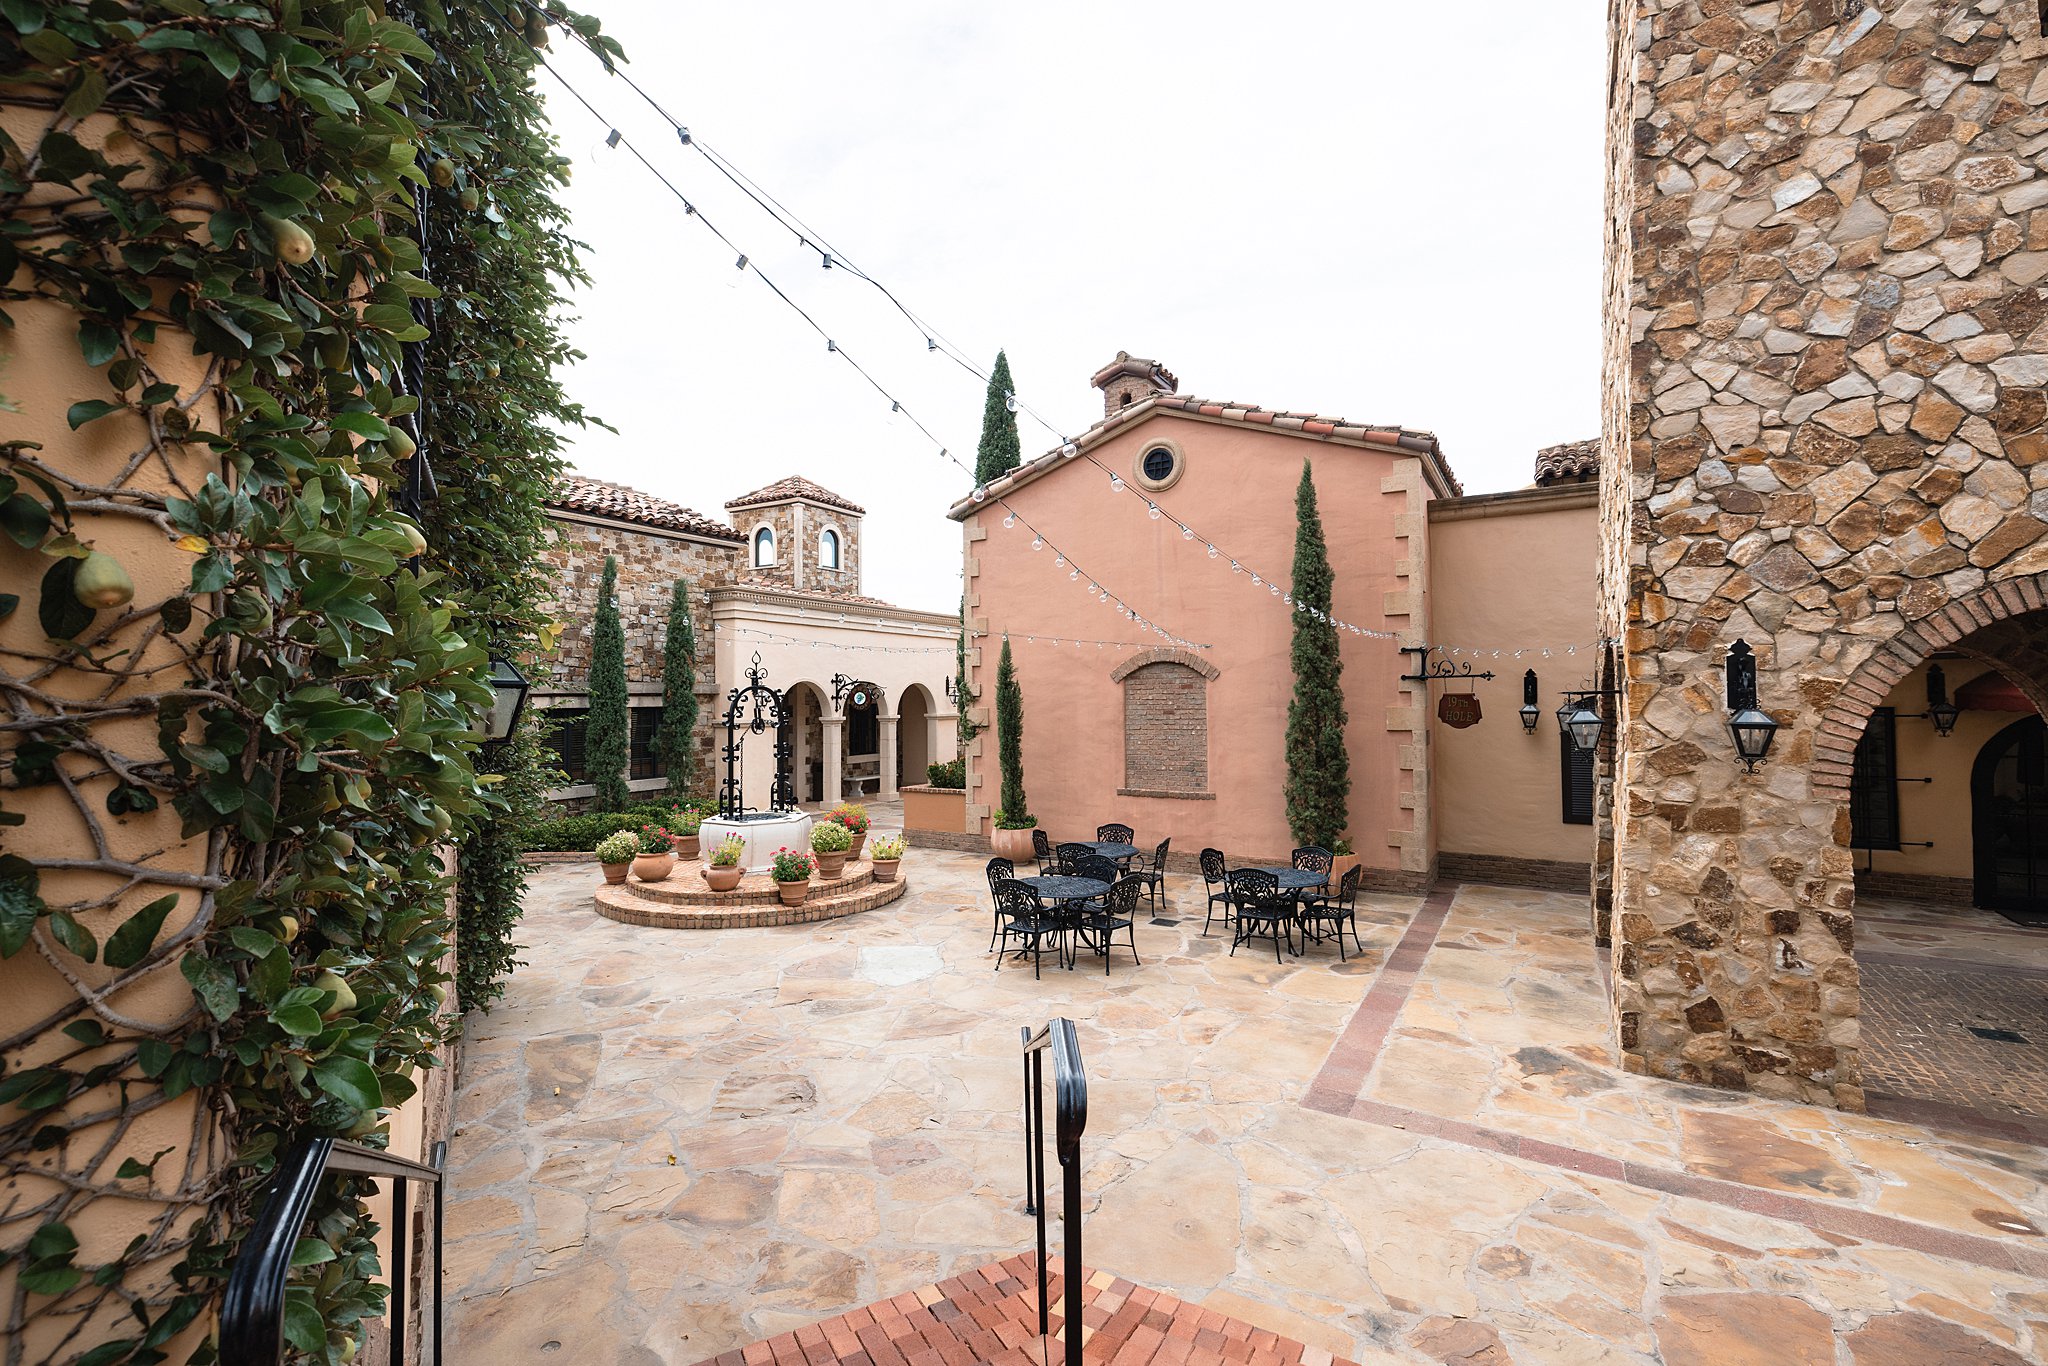 A view of the the club at bella collina wedding patio with market lights and a well